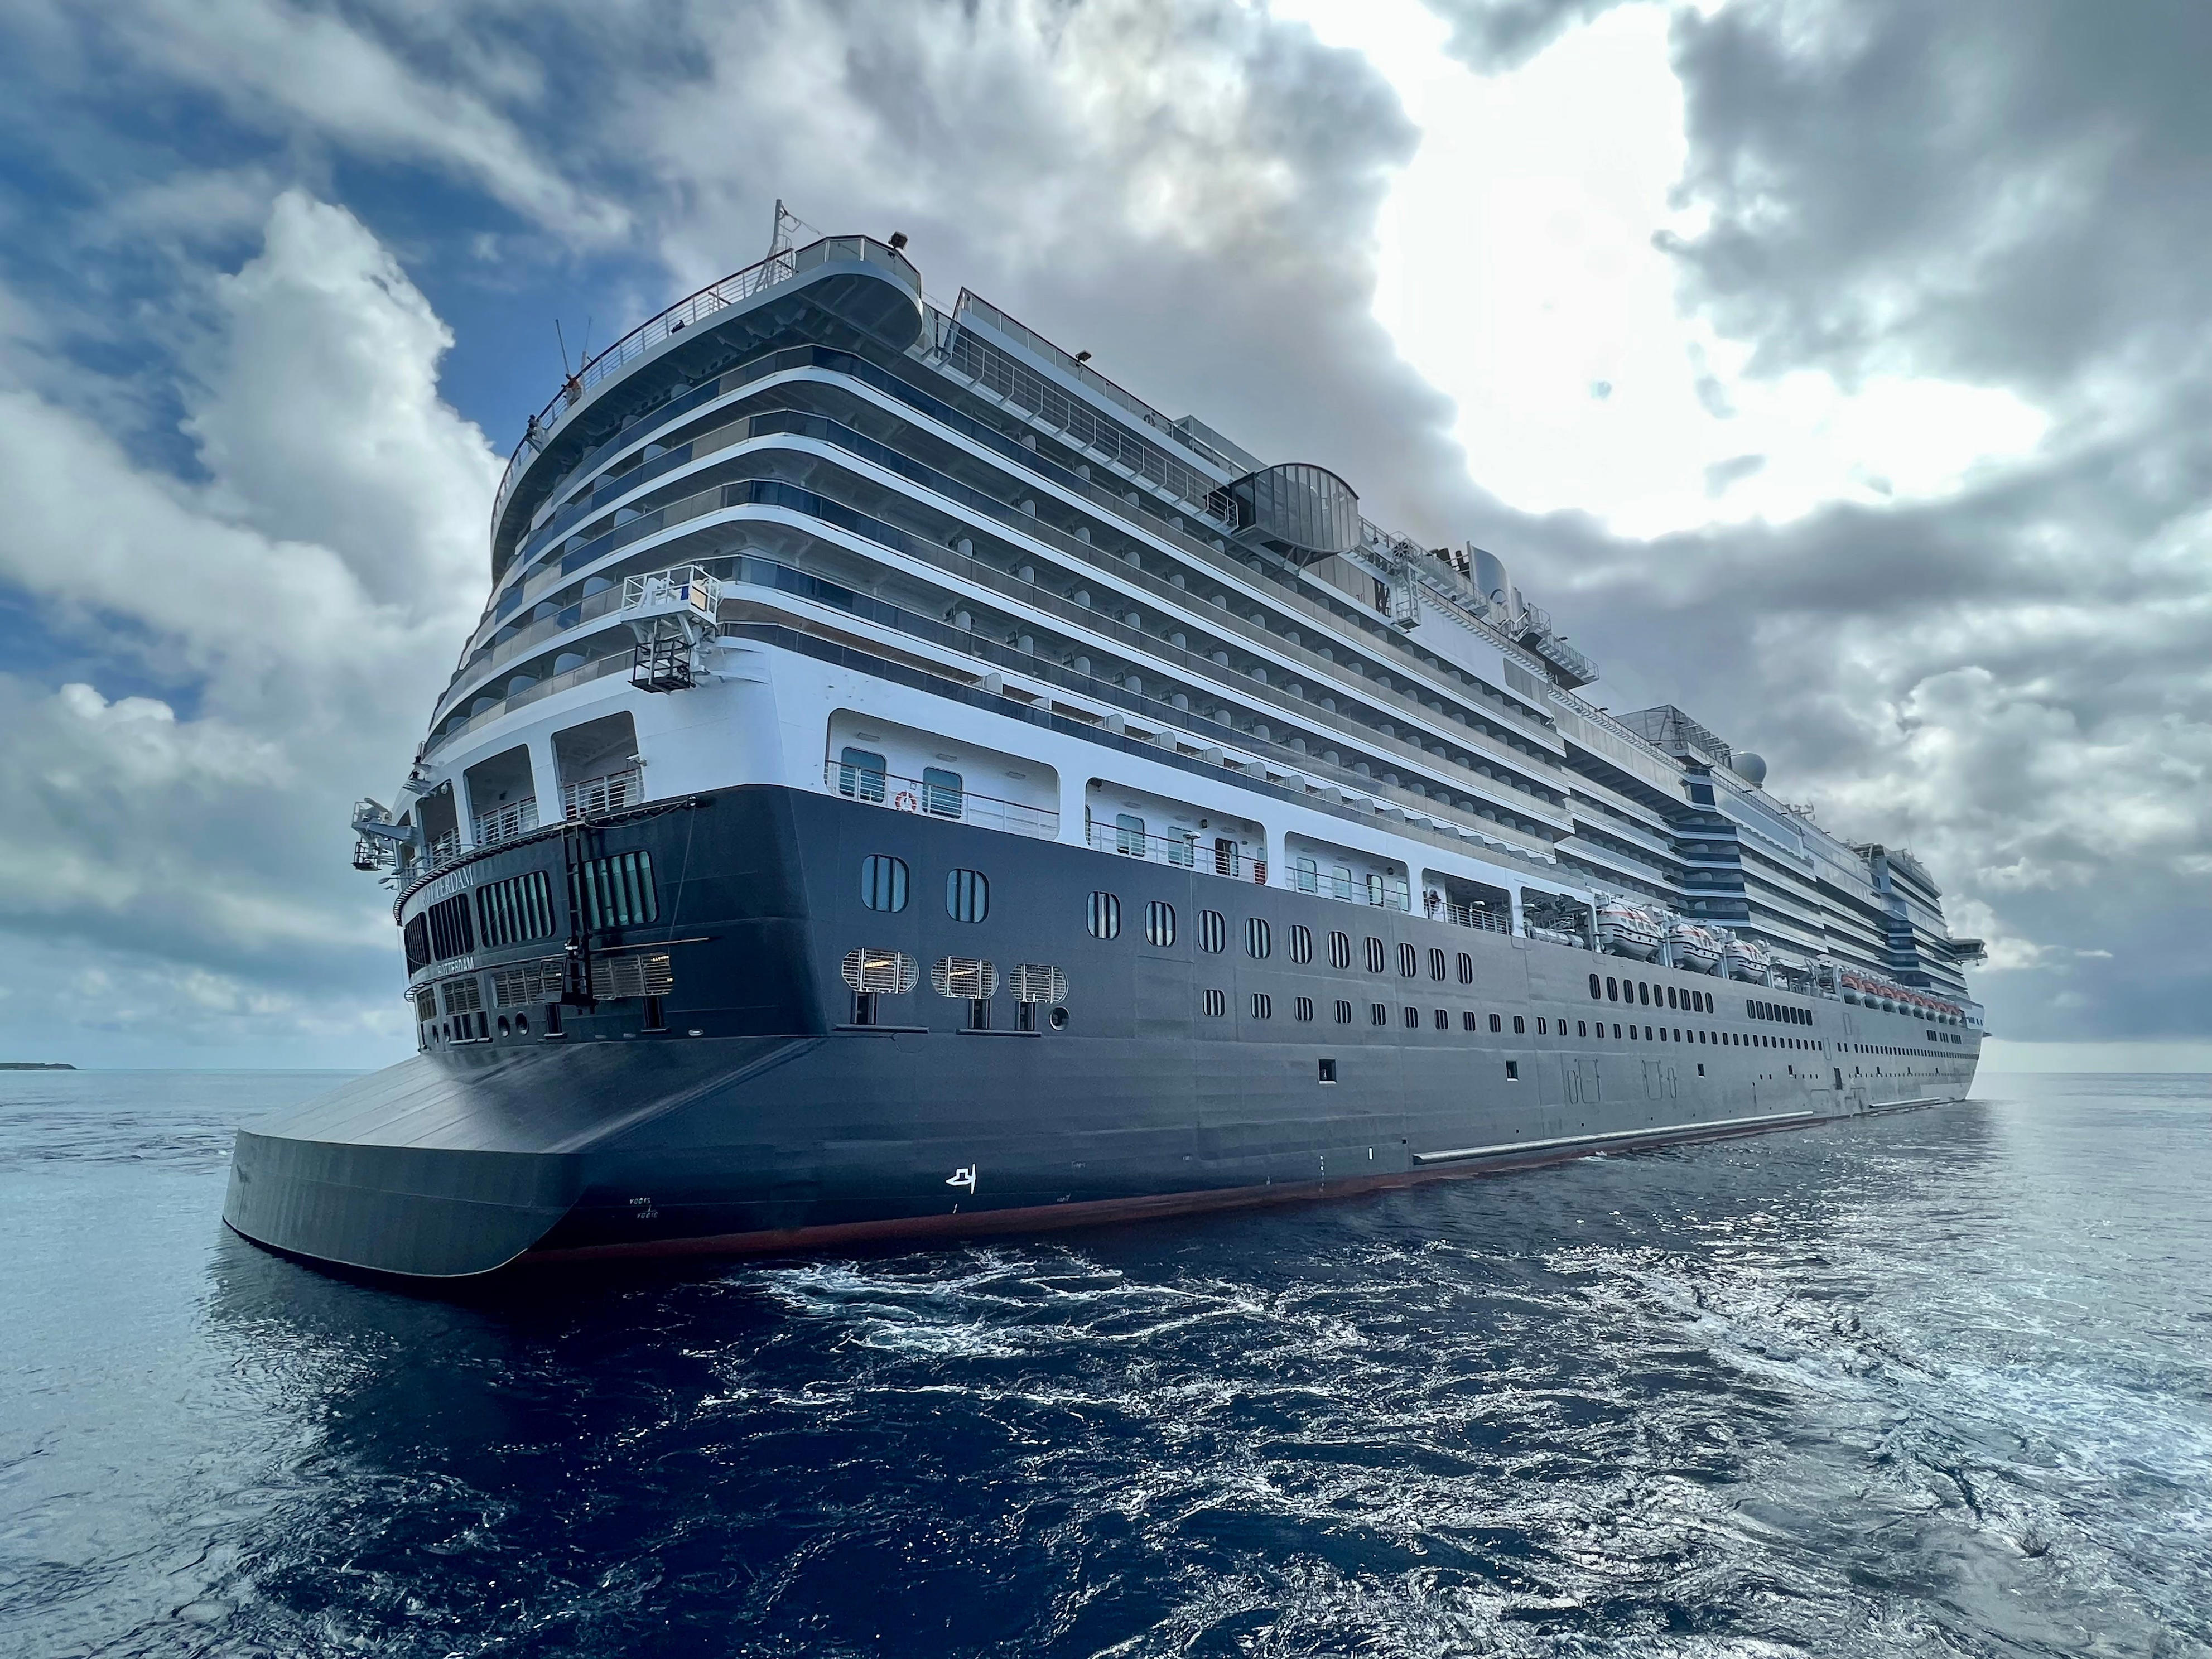 <p>You typically don't pay for a cruise in full upfront, and the final payment is often due 60 days or more before sailing.</p><p>However, I learned to always check the current rates for the sailing before making that final payment. If they've lowered, contact your cruise line to request a price adjustment or a refund of the difference.</p><p>If the price significantly drops after the final payment, you likely won't get any money back, but you can often <a href="https://www.insider.com/i-live-on-cruise-look-inside-my-room-wraparound-balcony-photos-2023">negotiate a room upgrade</a> or future cruise credit.</p><p>In September, I saw that my November cruise with Norwegian Cruise Line was discounted by more than 40%. I reached out to the cruise line and got upgraded to a <a href="https://www.insider.com/photos-inside-cheap-cruise-balcony-room-holland-america-line-oosterdam">balcony stateroom</a> for free.</p>